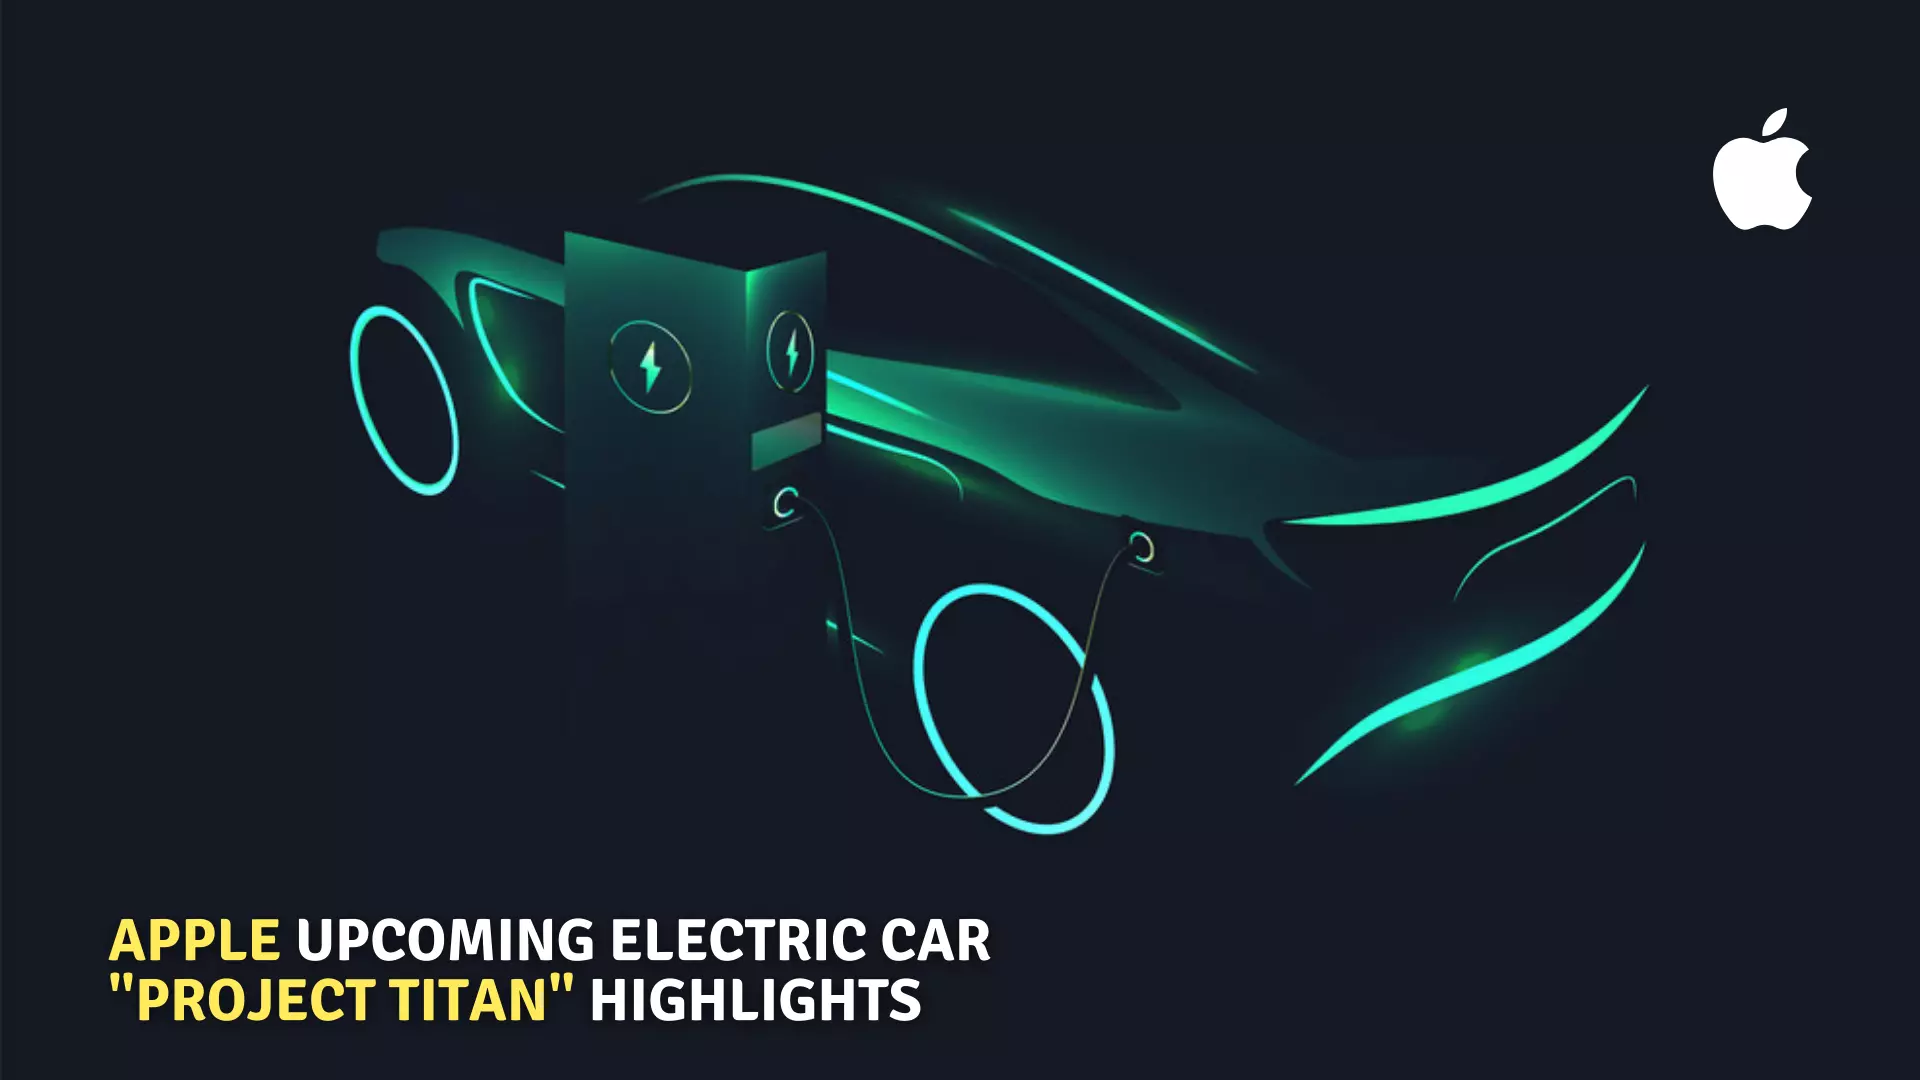 https://e-vehicleinfo.com/apple-upcoming-electric-car-project-titan-highlights/